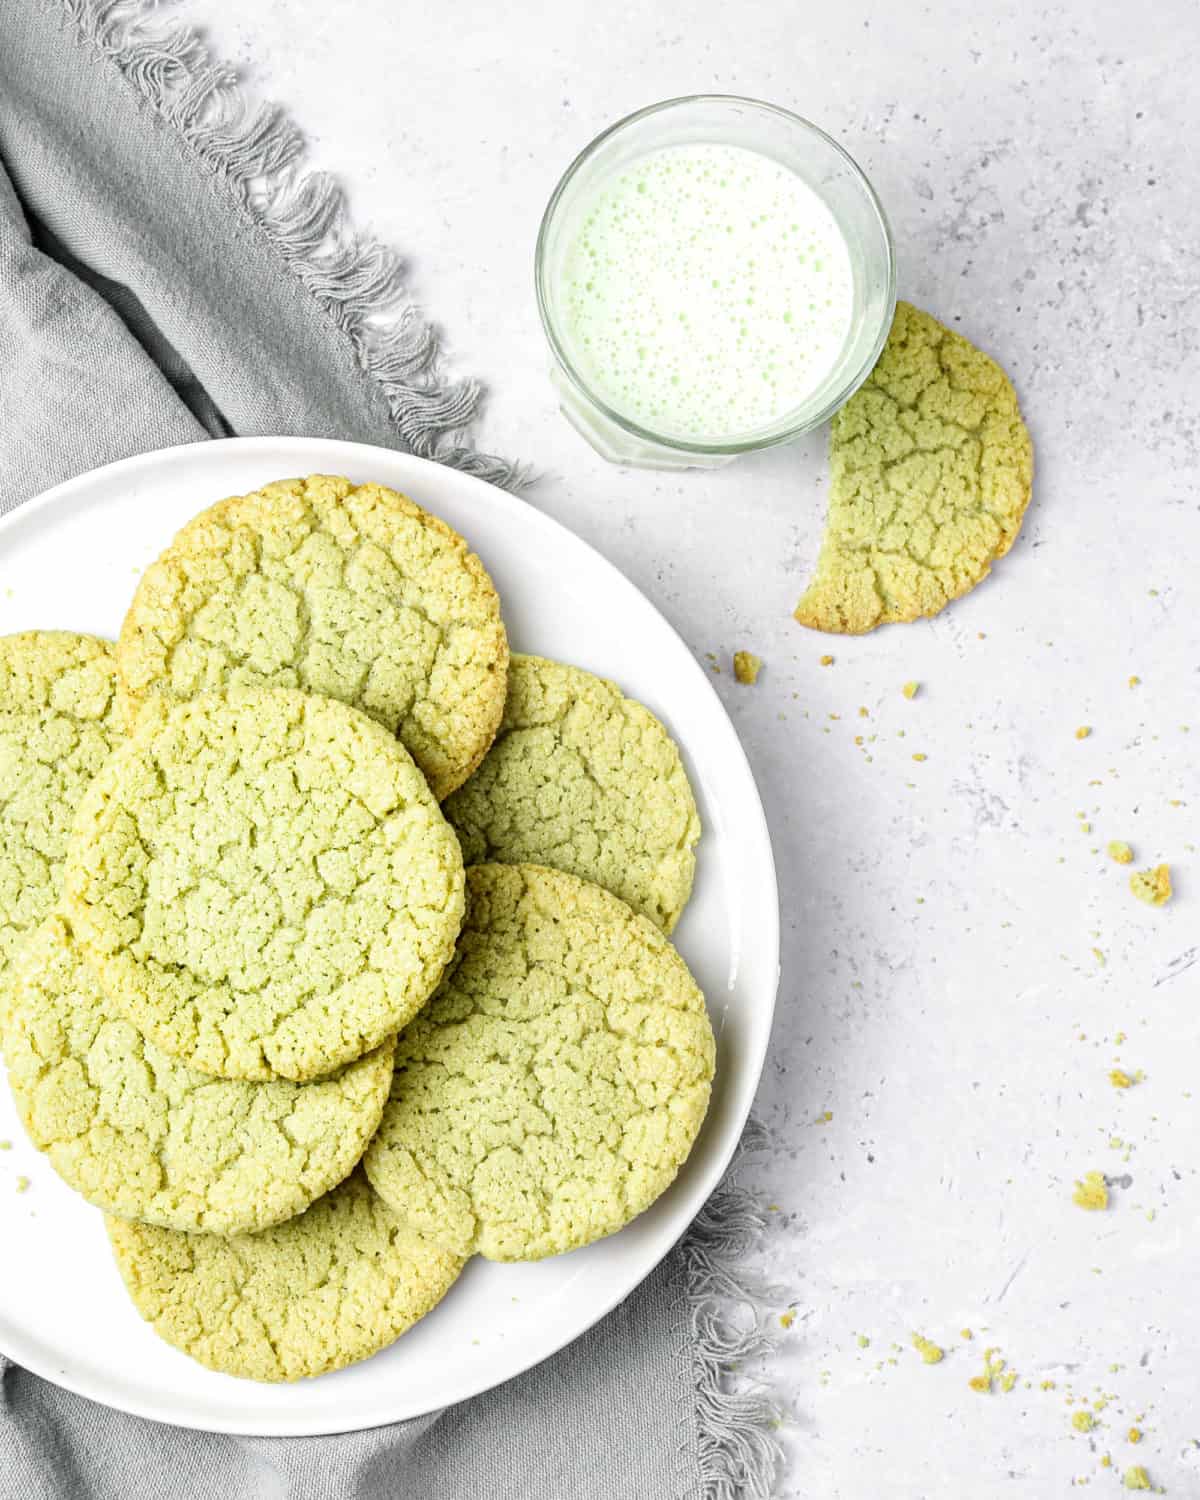 Green cookies on a white plate with a glass of milk.